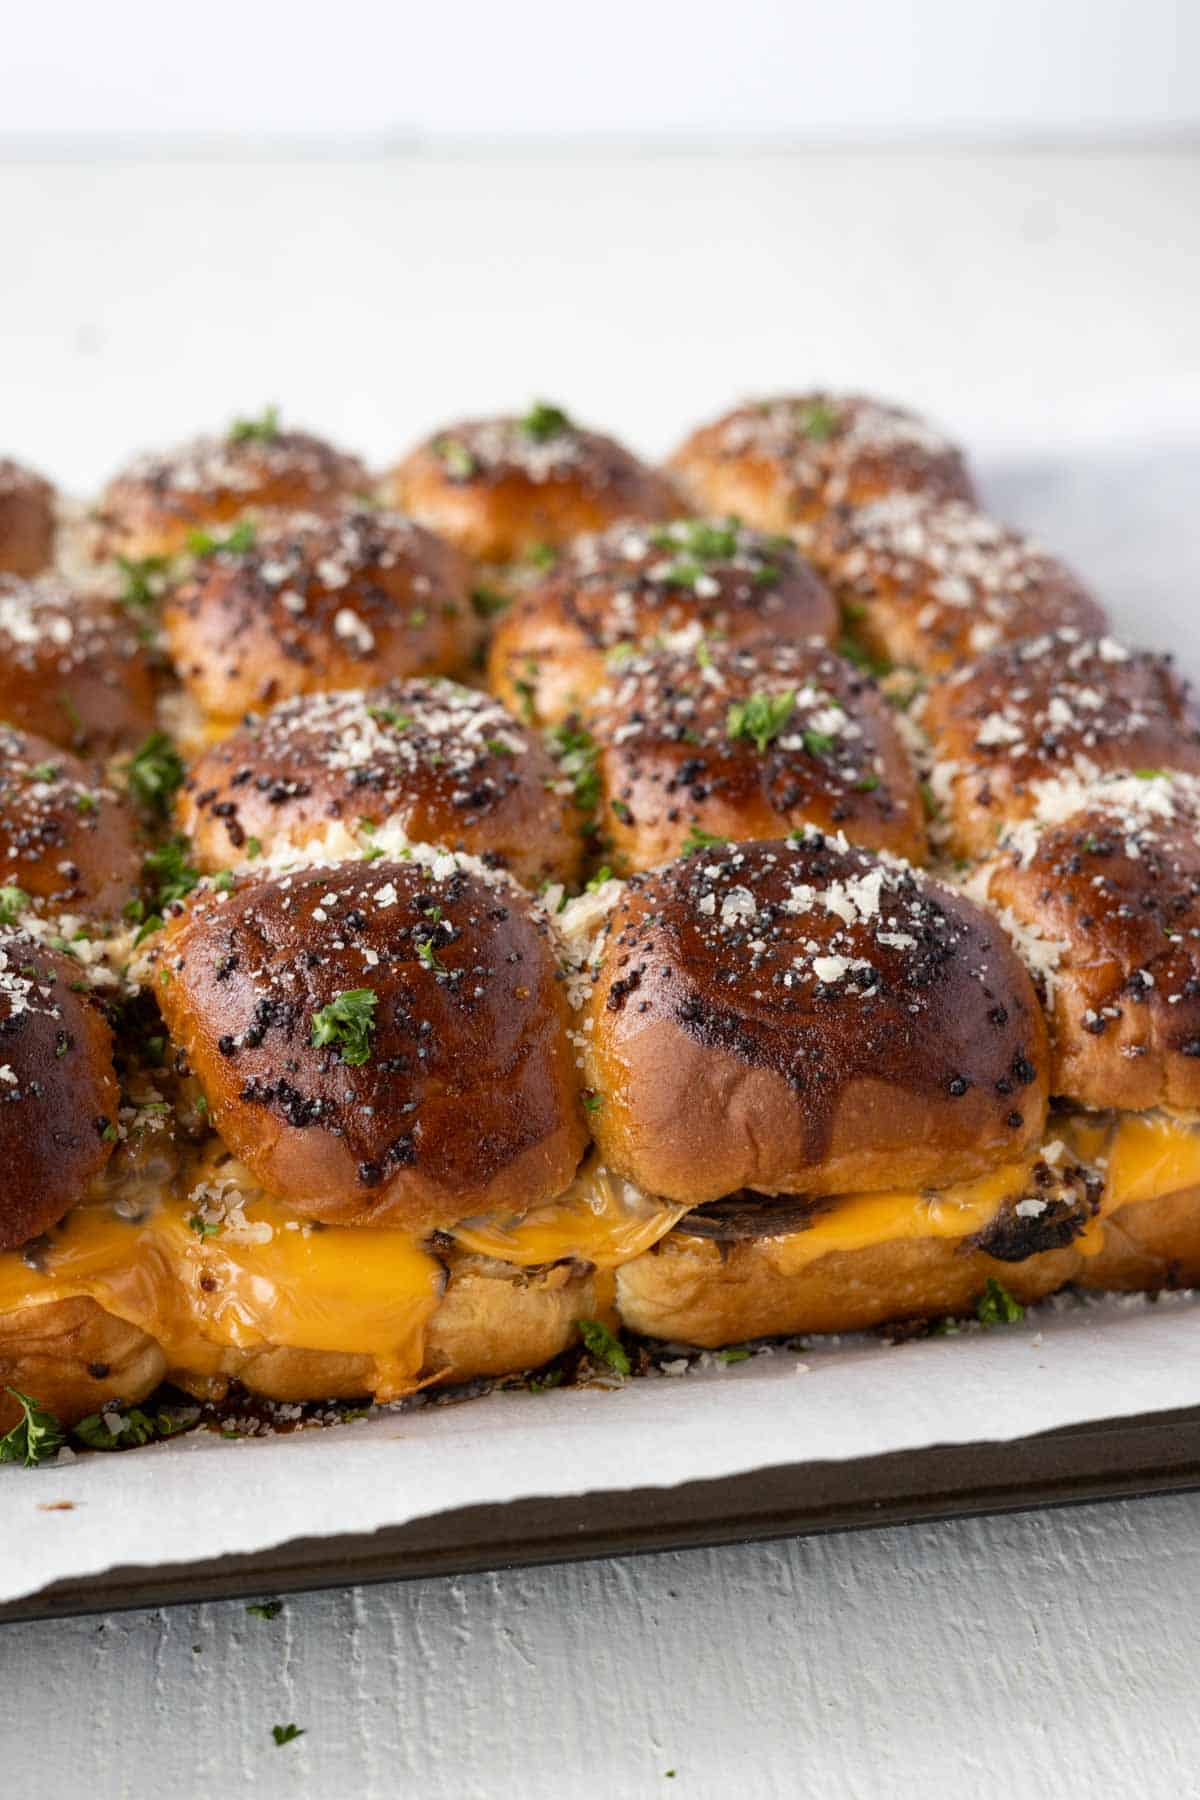 Baked cheddar and roast beef sliders on a baking sheet.